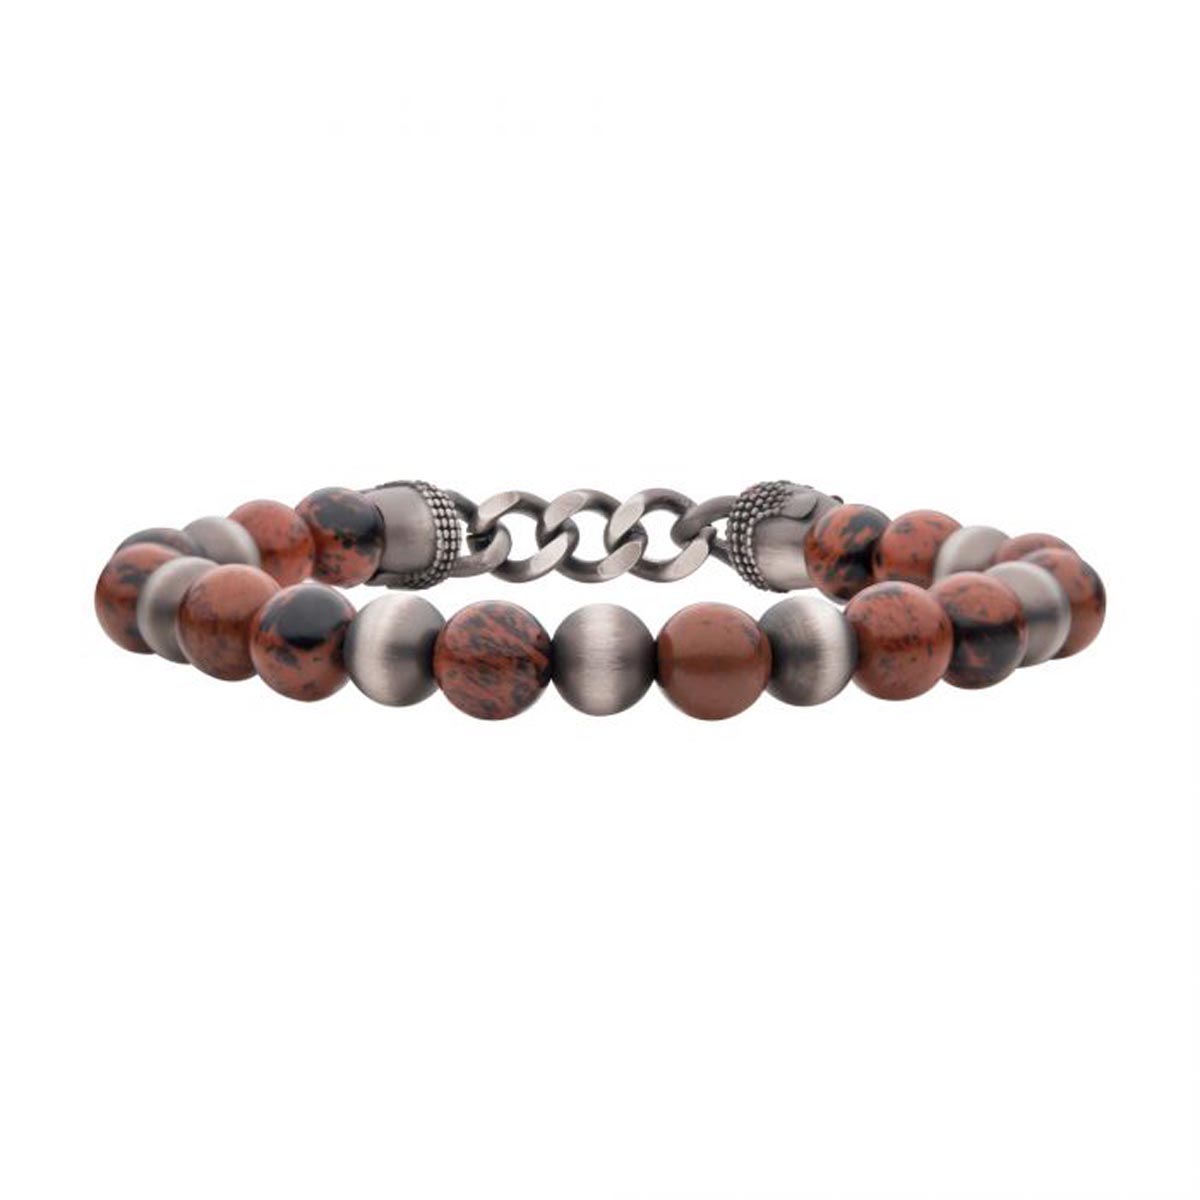 Amazon.com: Black Beaded Crystal Triple Protection Men's Bracelets Jewelry  Handmade with 10mm Lava Rock Silver Sheen Obsidian Hematite Crystal  Spiritual Stone Anxiety Relief Bracelets Gifts for Men 7“ : Handmade  Products